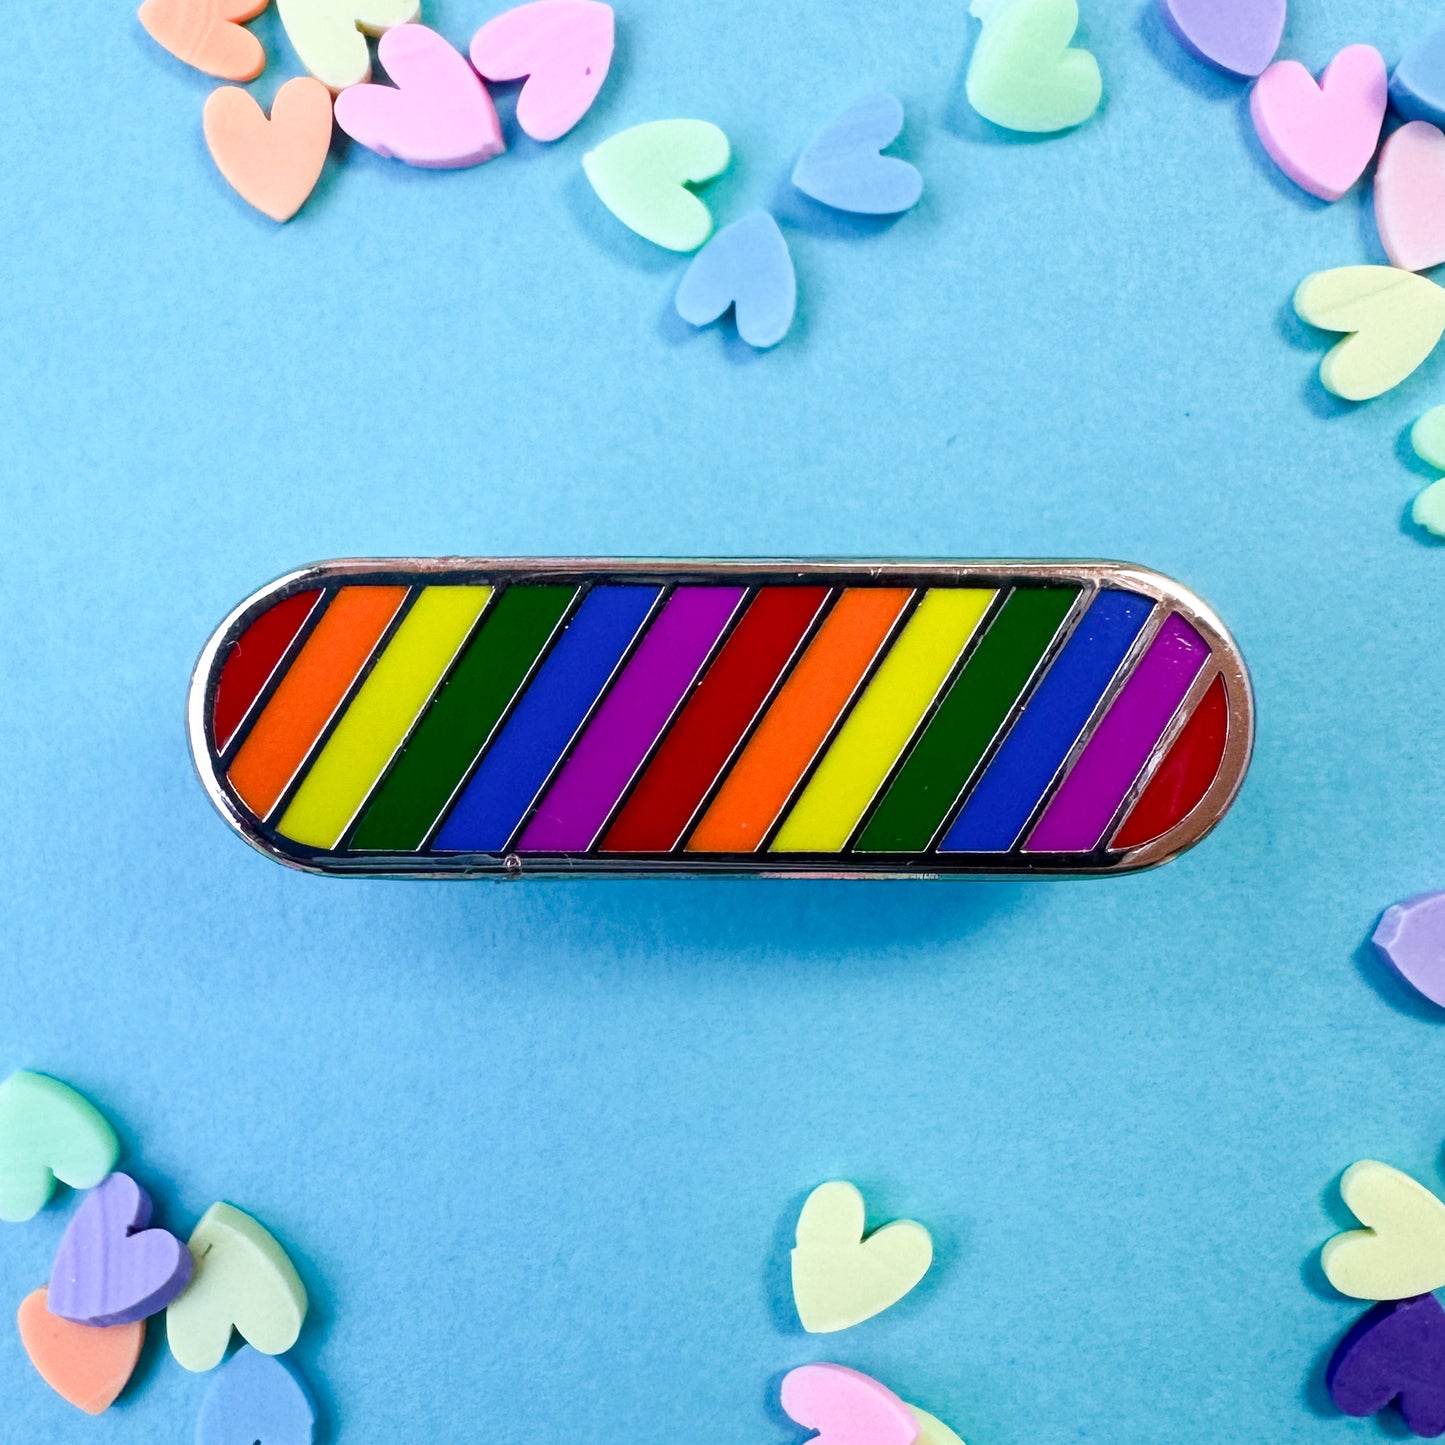 A capsule shaped enamel pin with rainbow stripes in diagonal lines. The pin is on a blue background with confetti hearts around. 